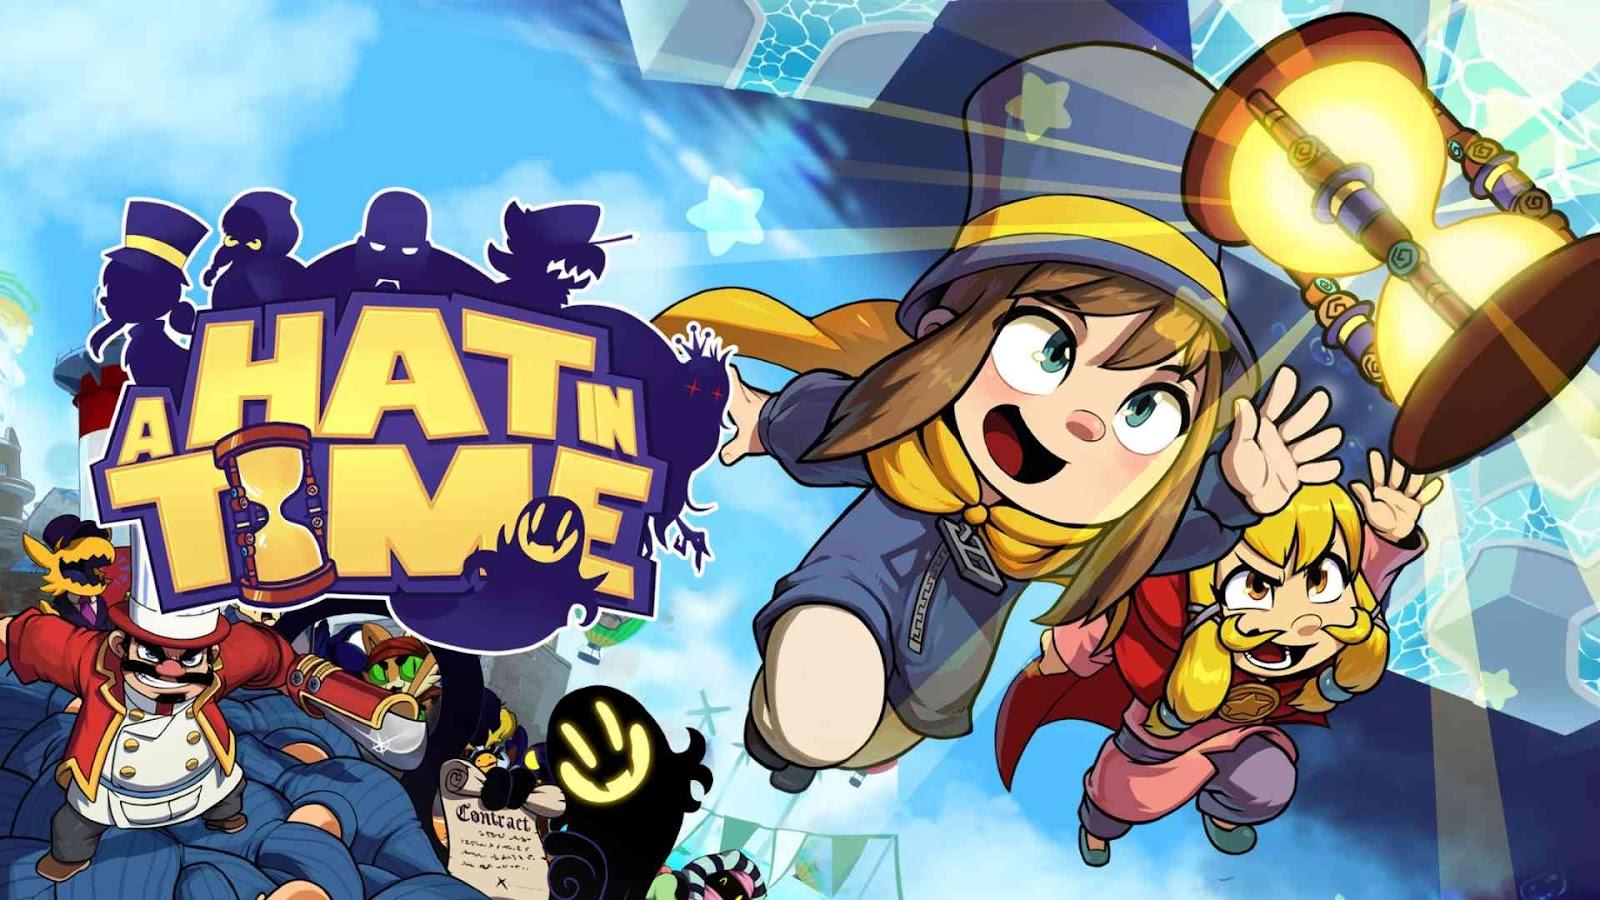 3. A Hat In Time